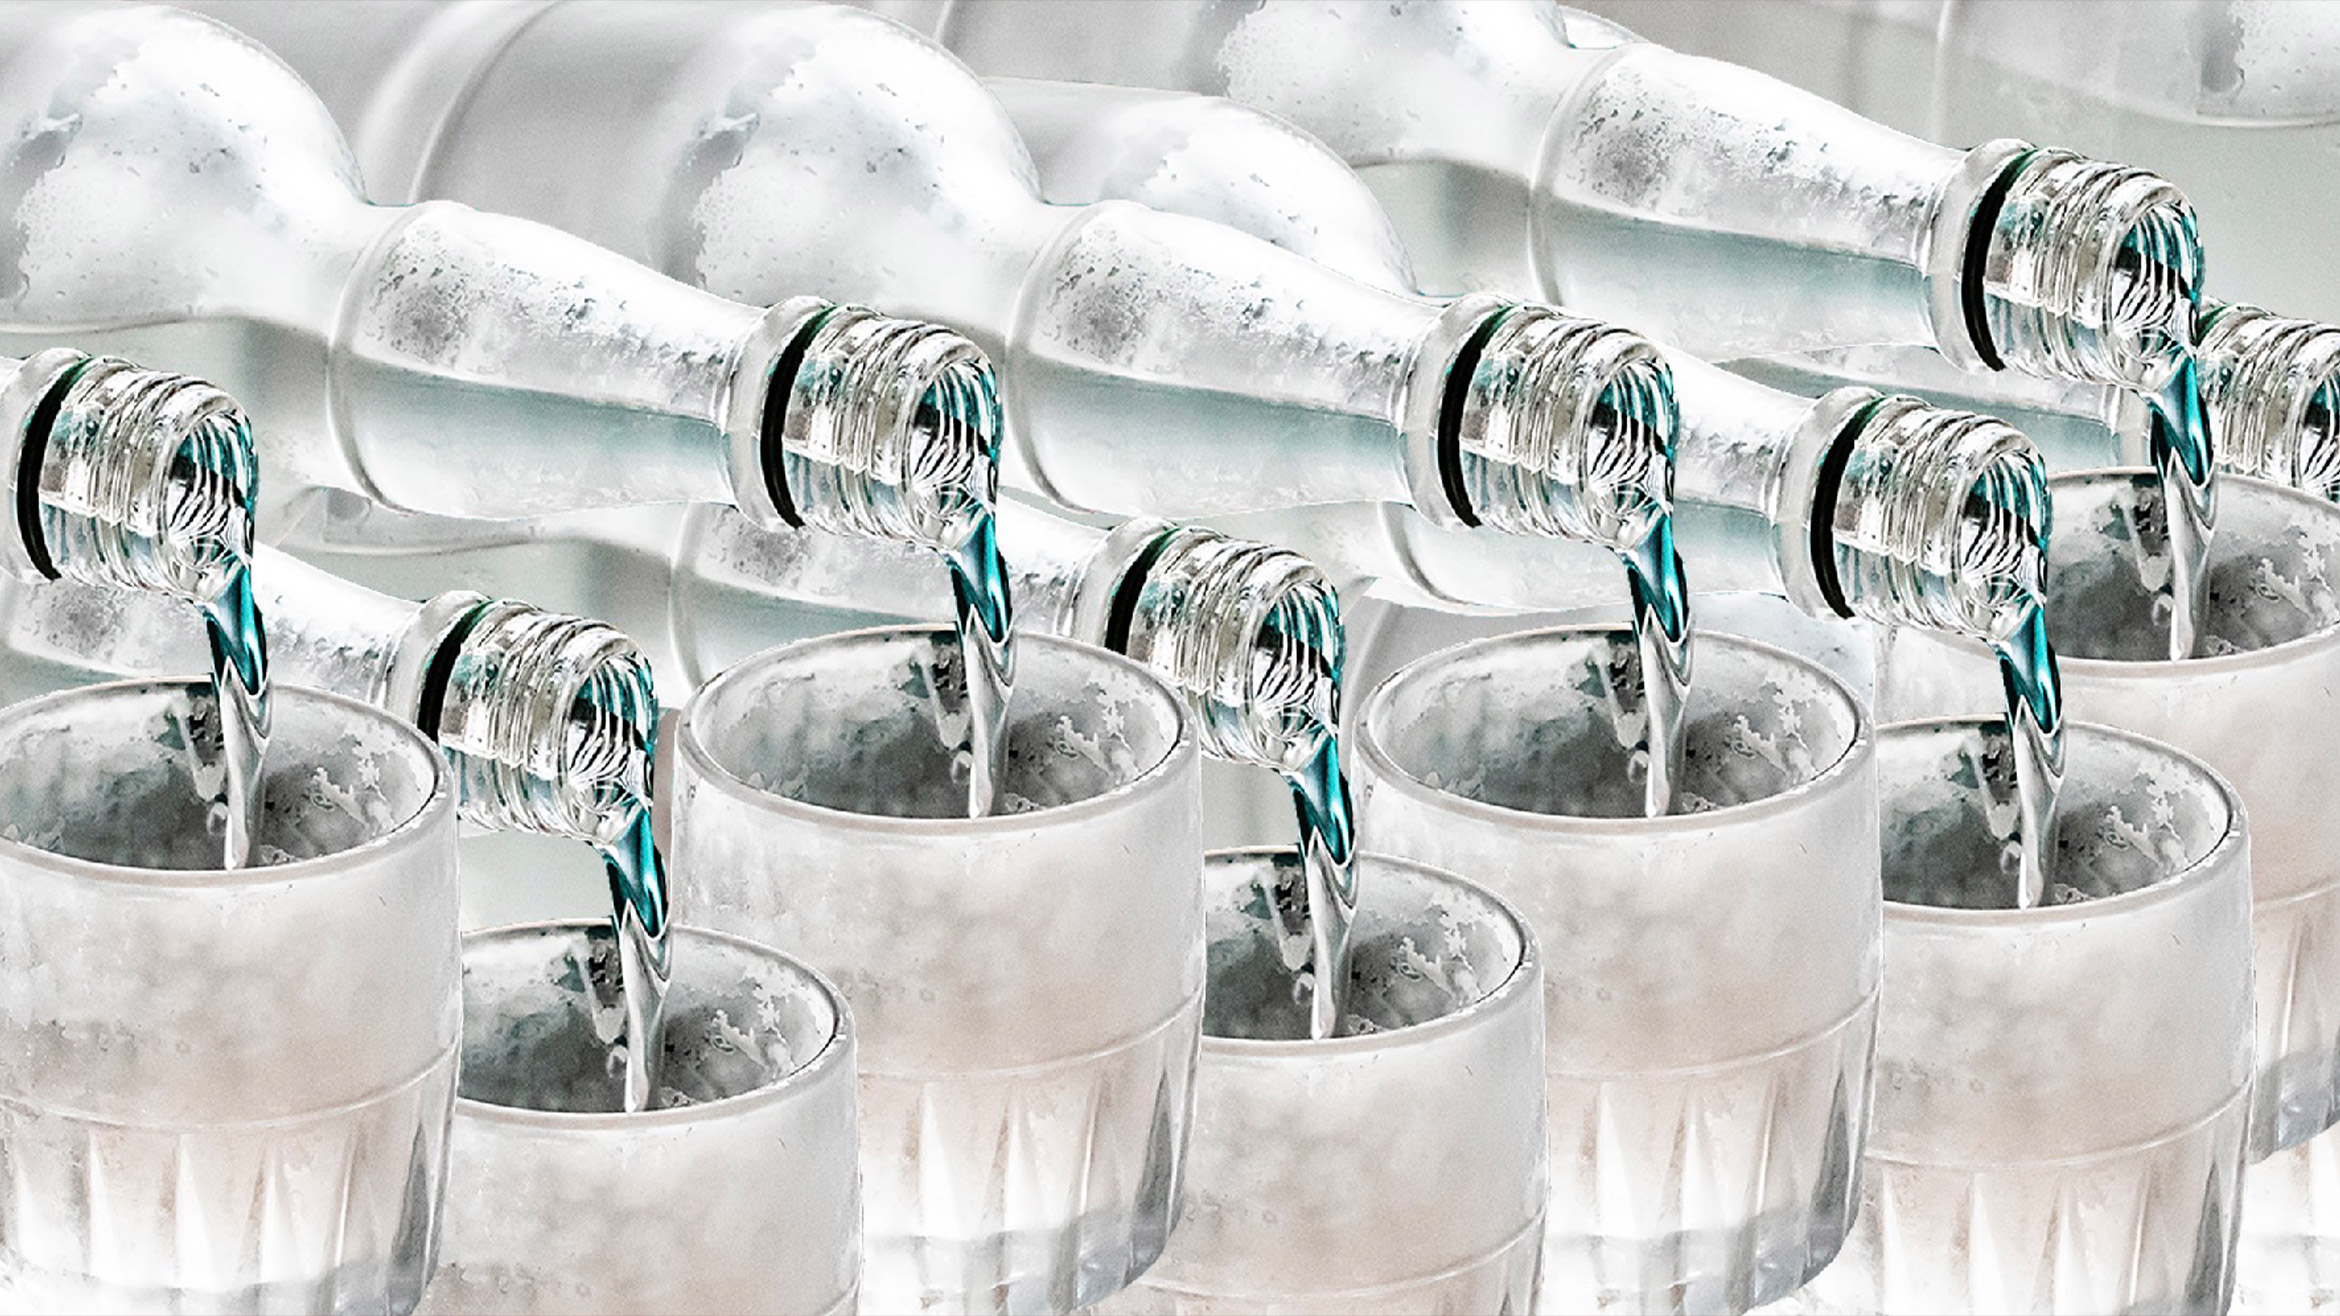 Frosty bottles pouring into glasses